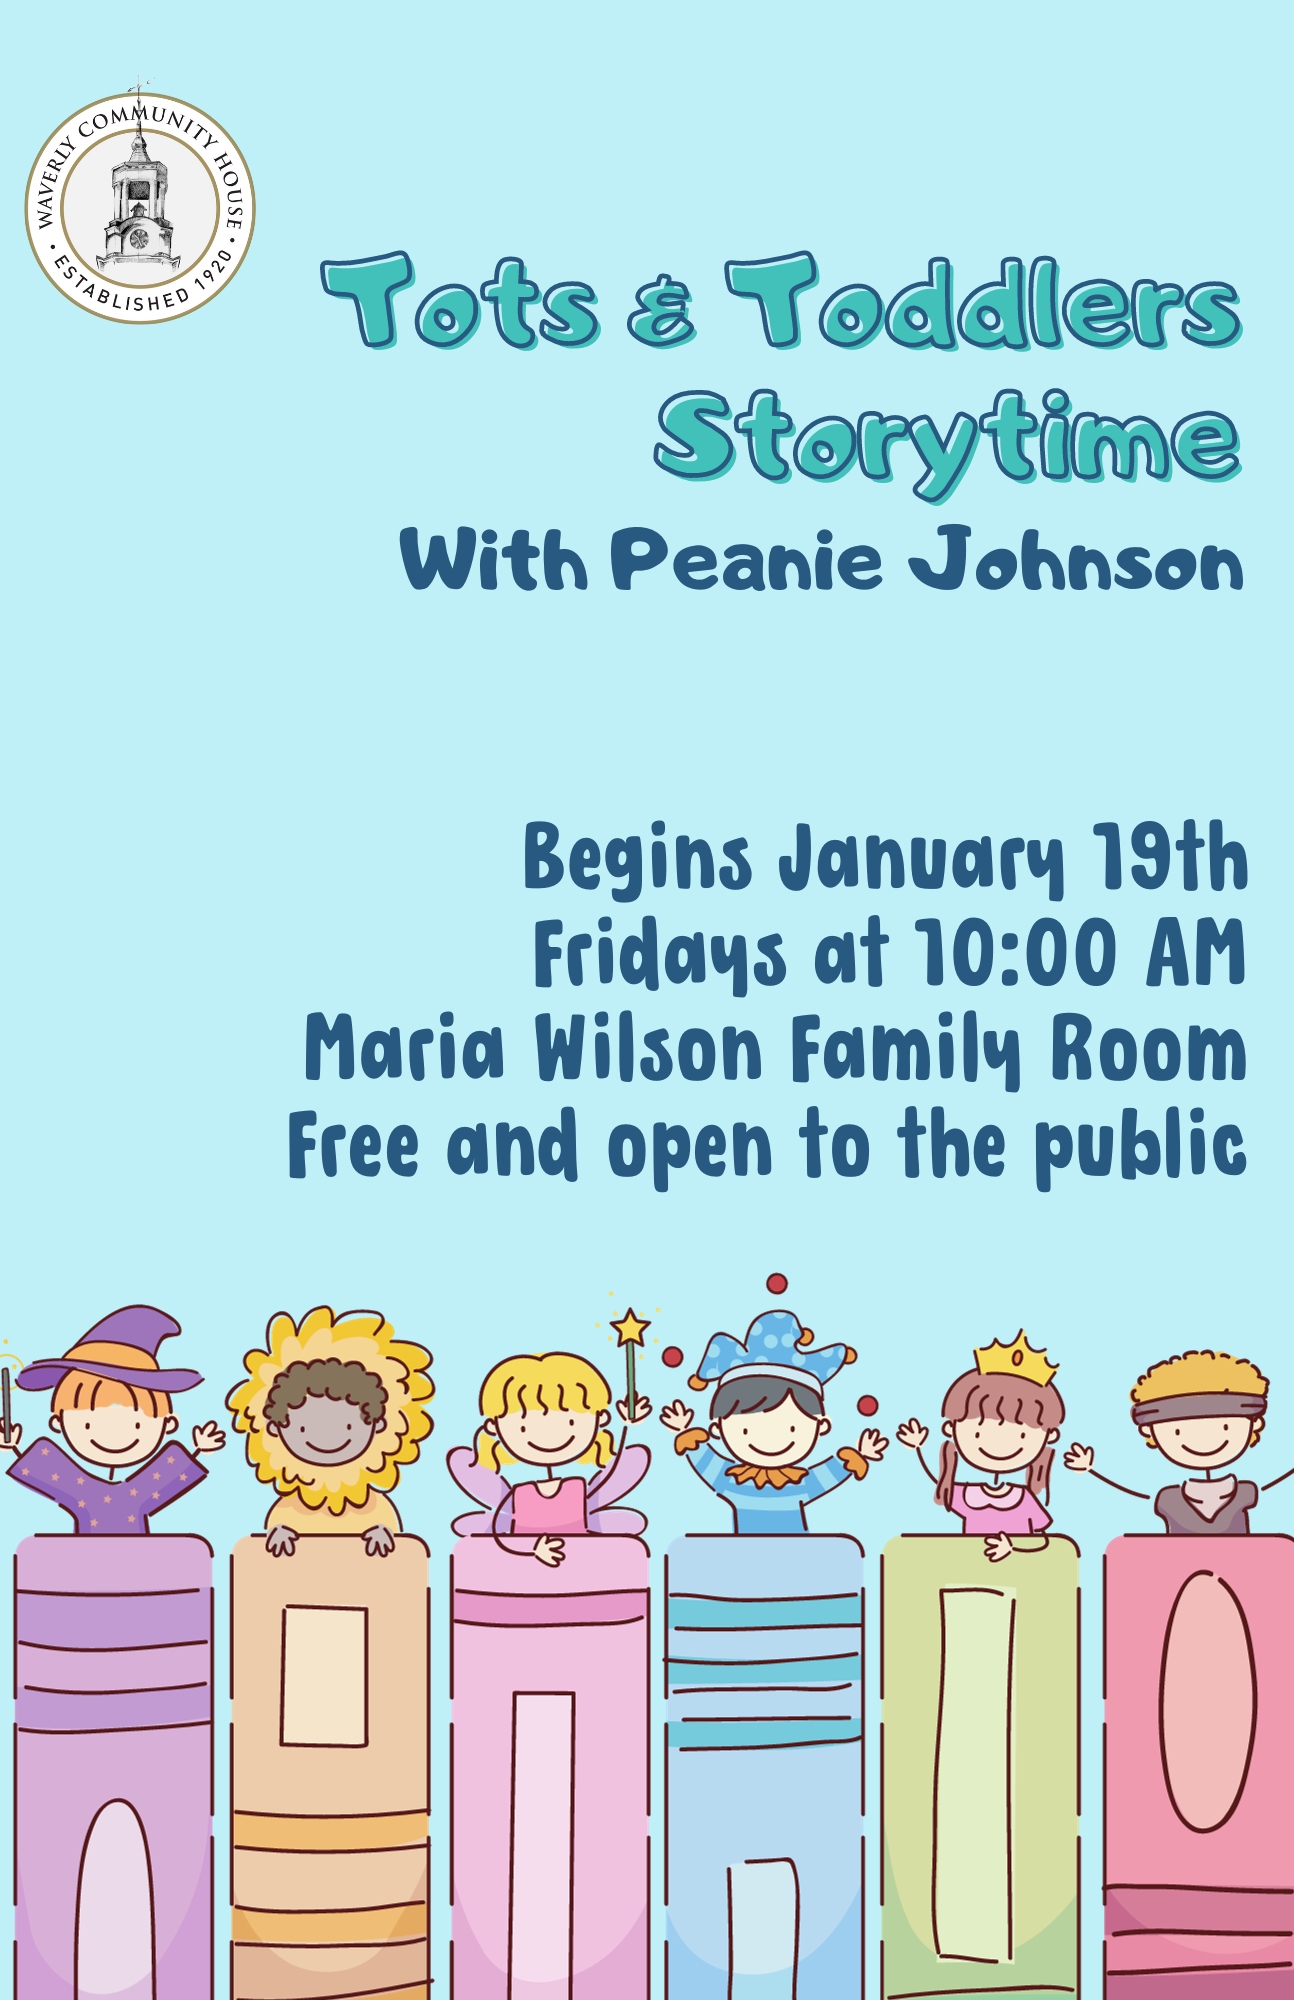 Tots & Toddlers Storytime with Peanie Johnson